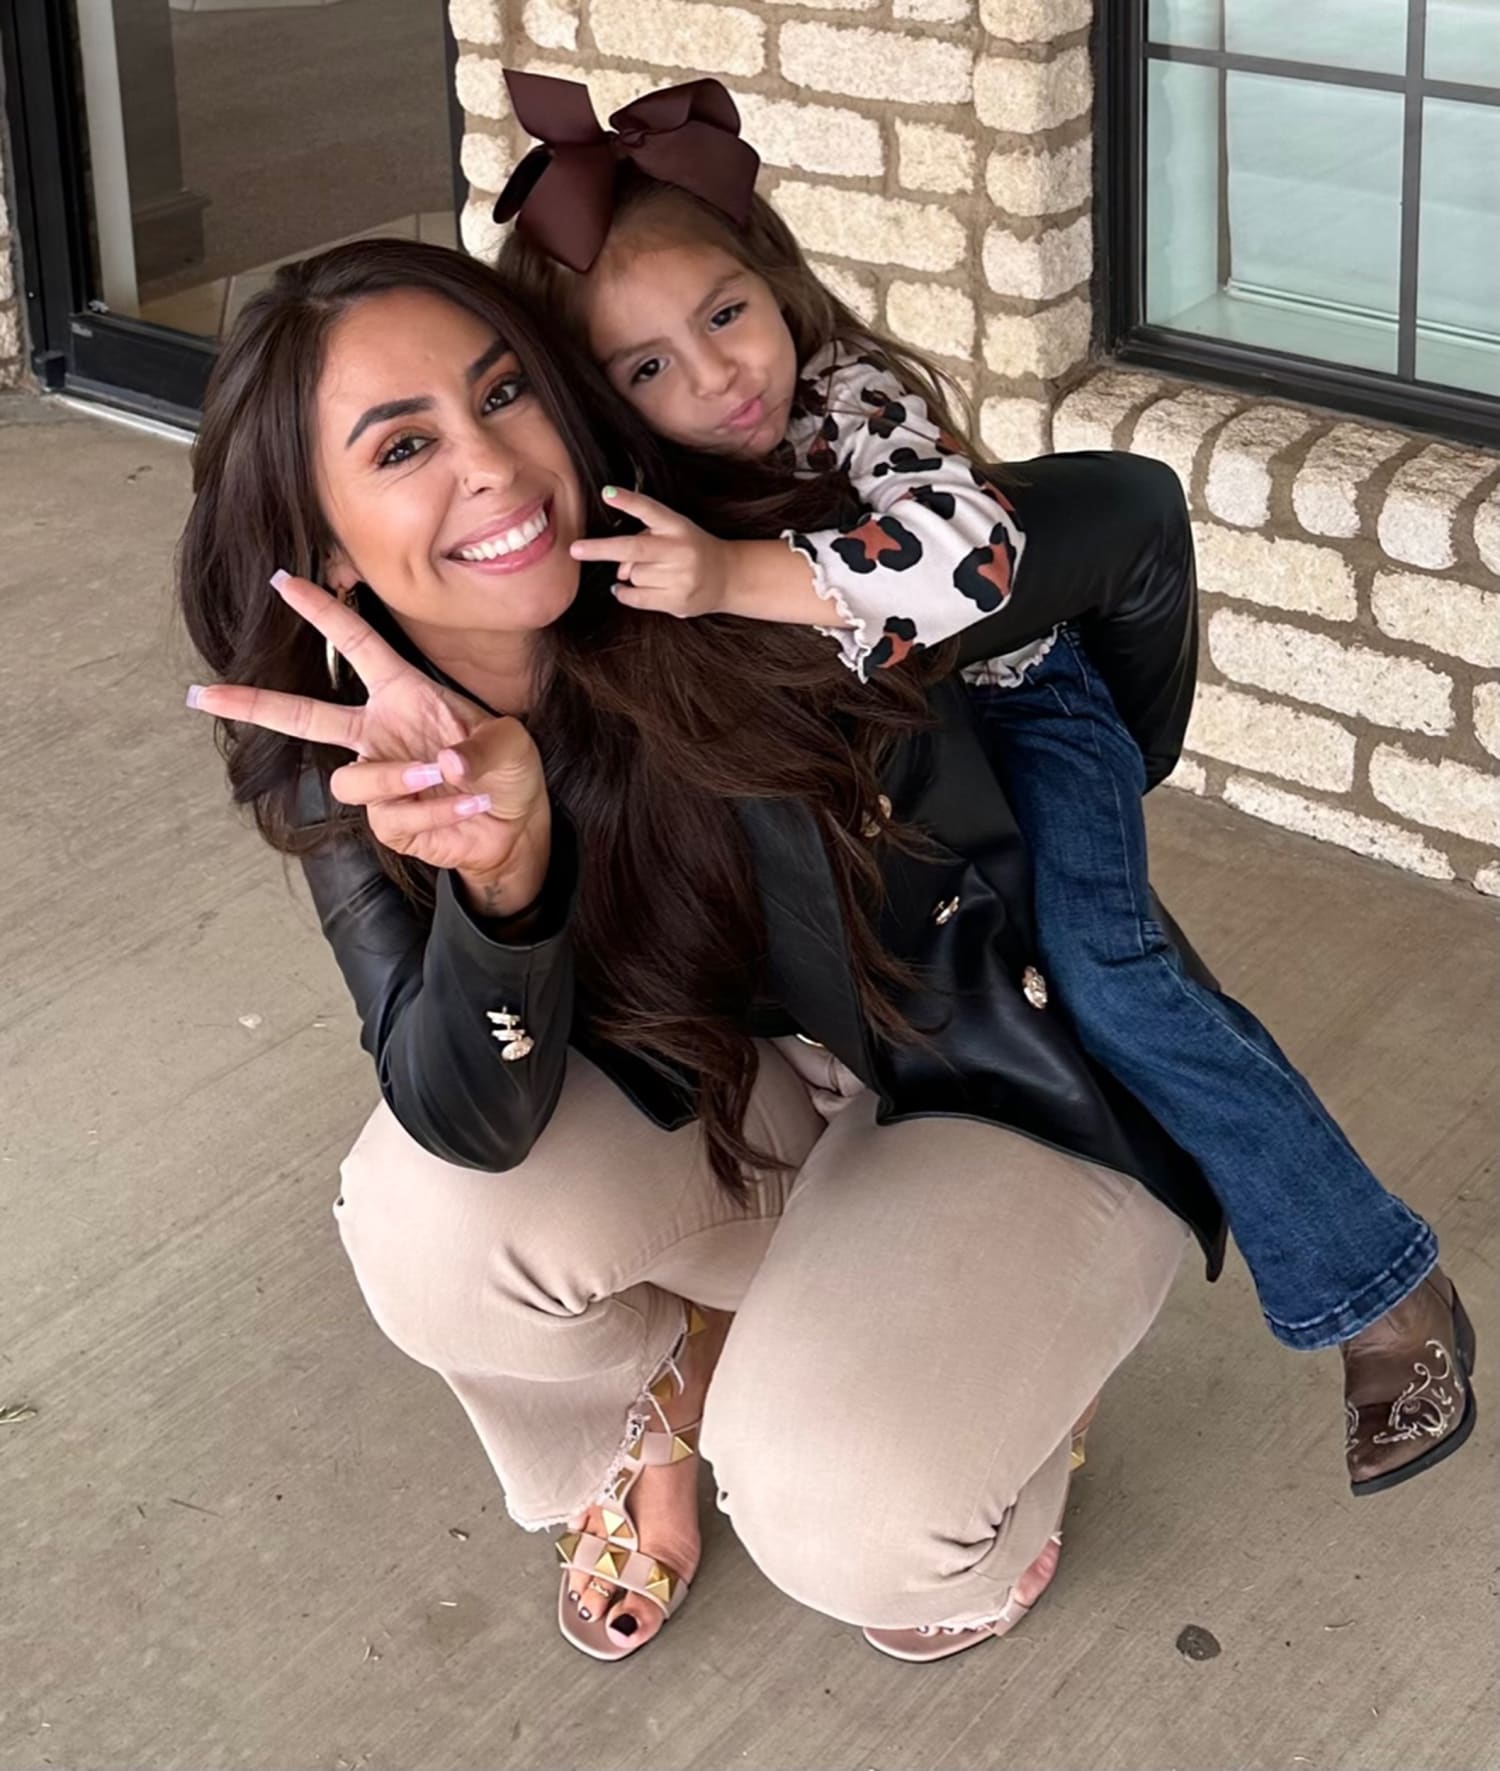 Texas Mom Waxes 3-Year-Old Daughter's Unibrow In TikTok Video